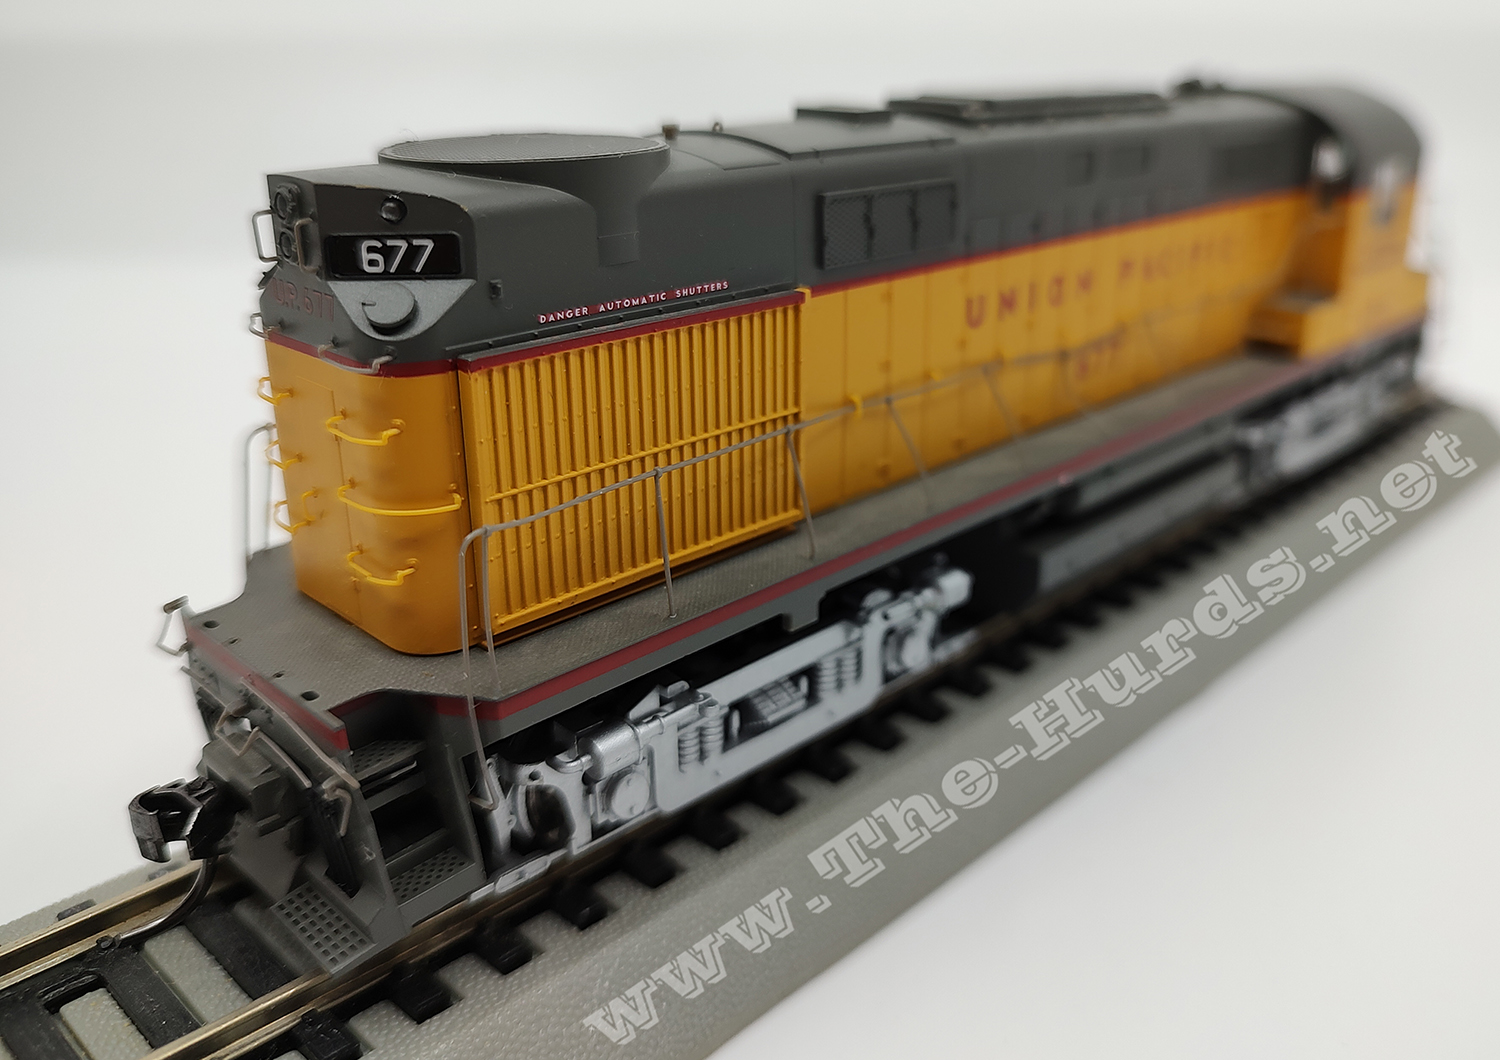 6th view of the Life-Like DCC with Sound Union Pacific #677 Alco RS27 in my HO-scale Collection